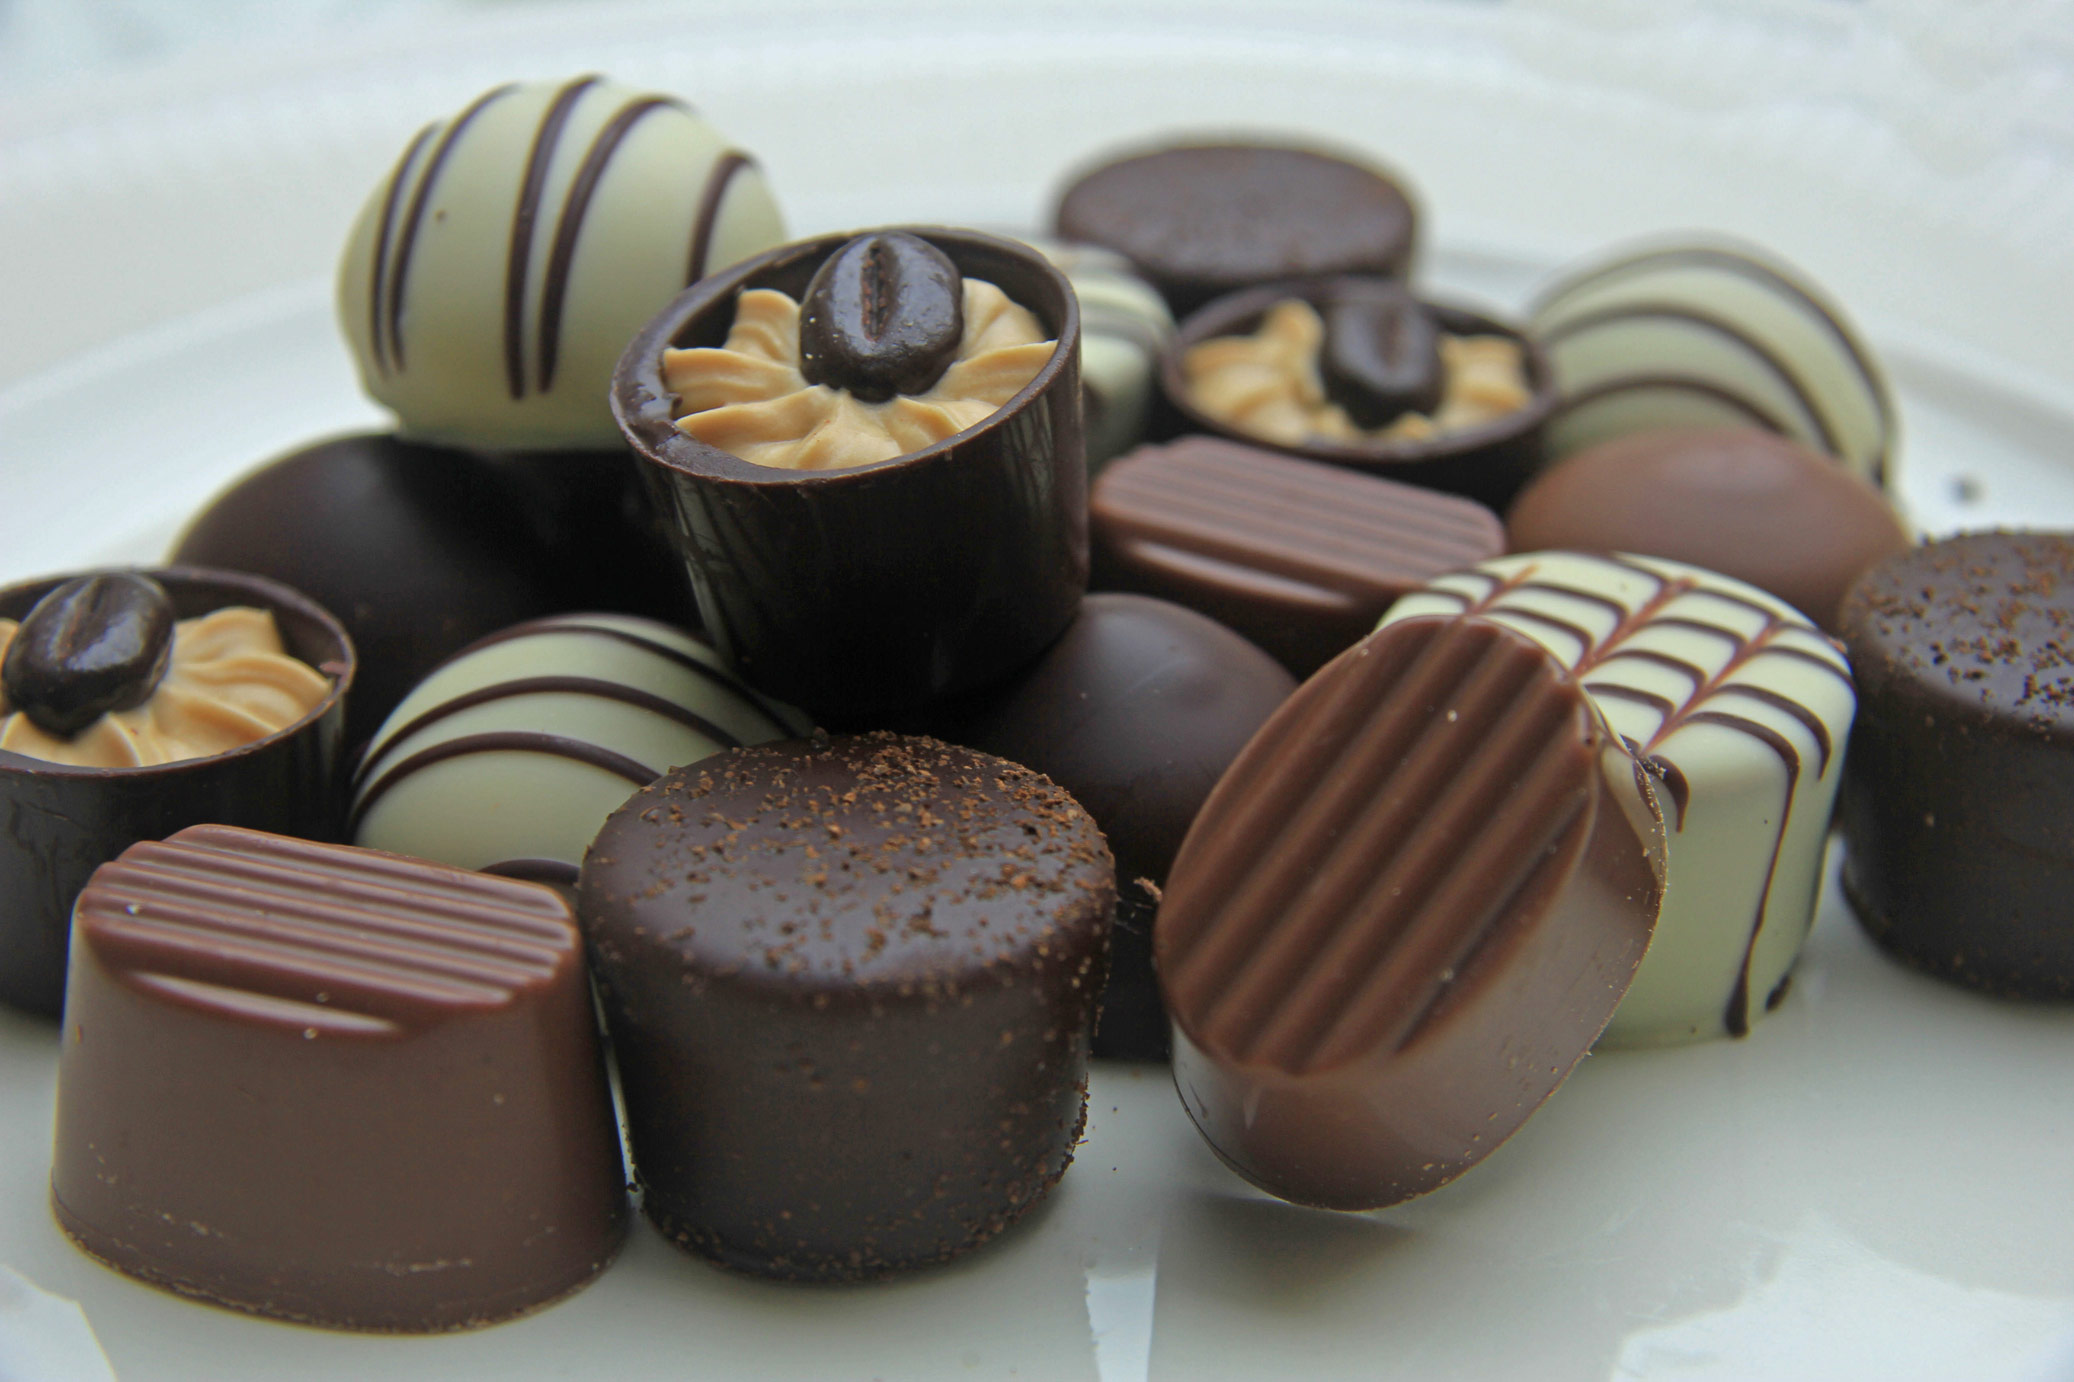 Purchase your favorite chocolate from an online store